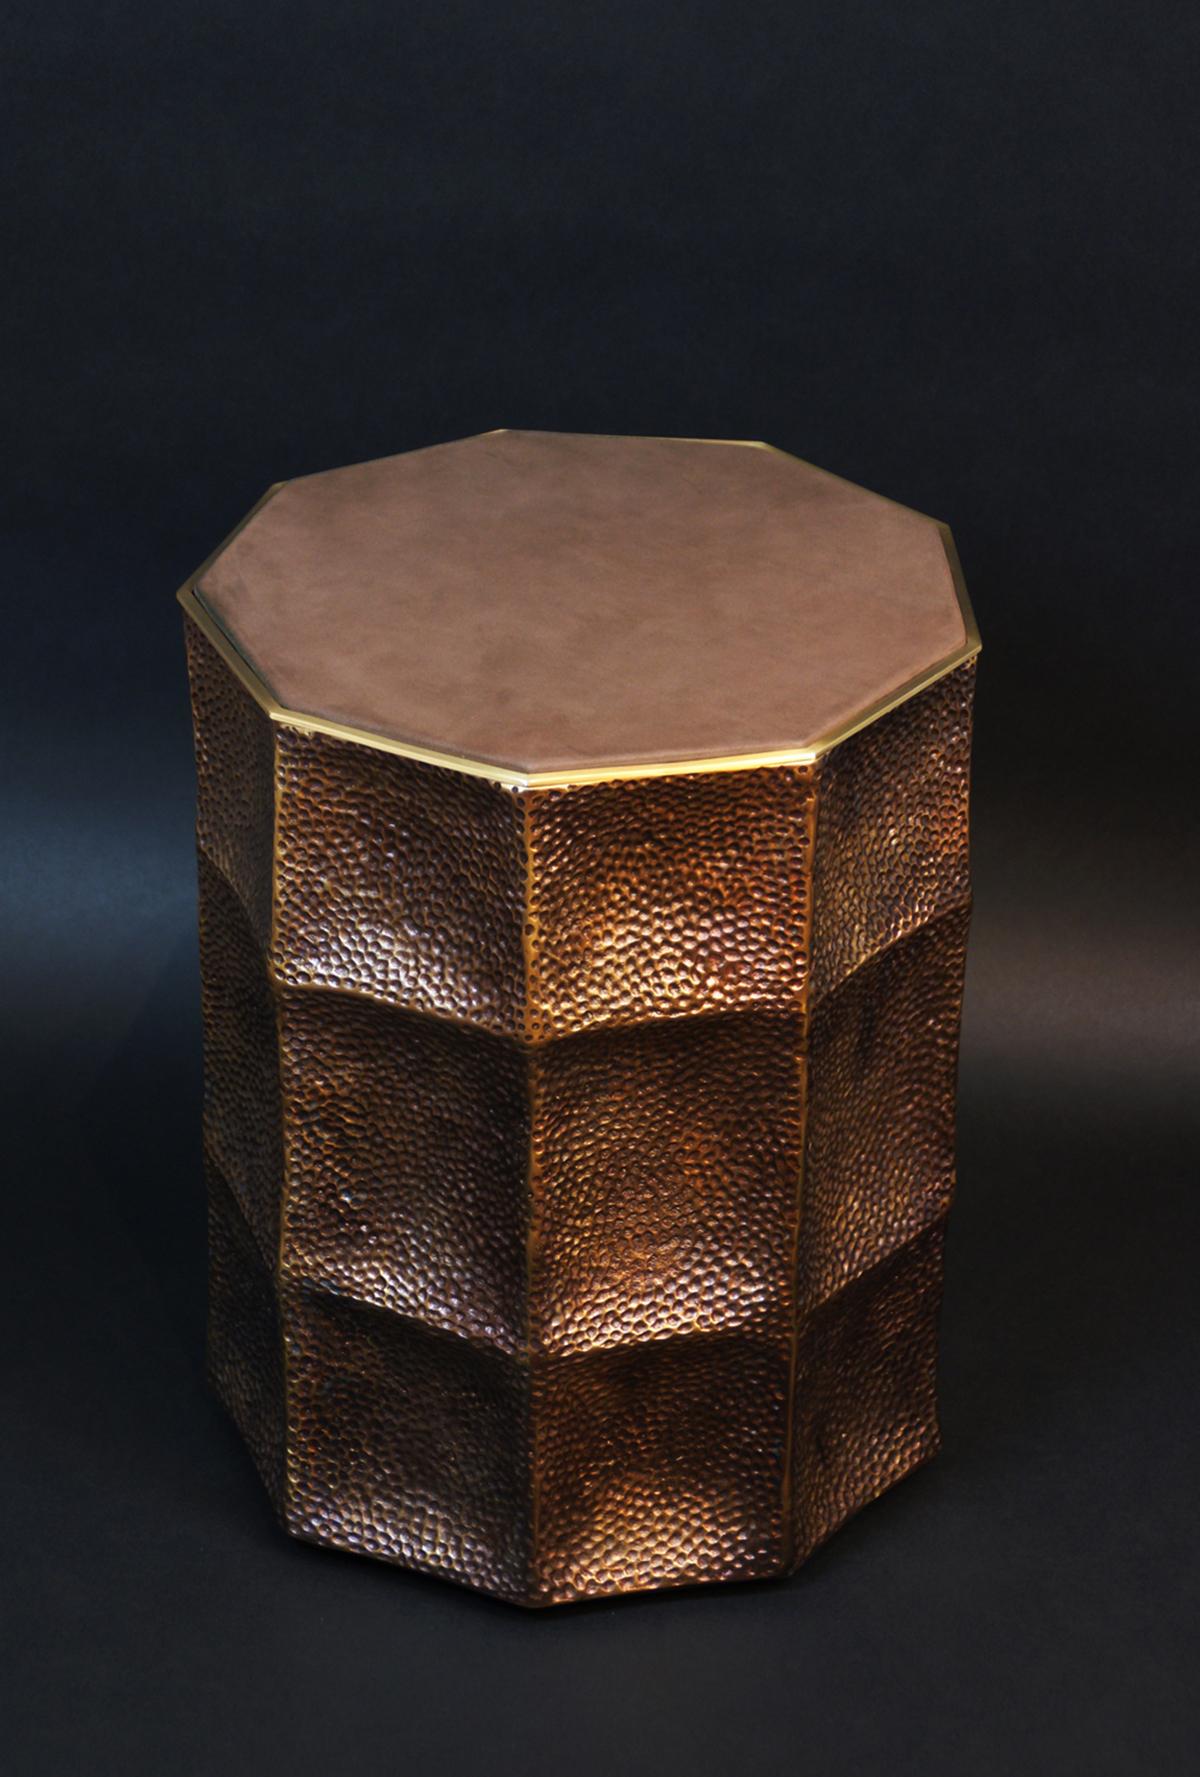 Rhino side table by Atelier Demichelis.
Numbered and signed.
Dimensions: D 35 x H 43 cm.
Materials: patinated bronze, brass, brown cow leather.

Laura Demichelis

Laura was born & brought up in Provence, in the south of France.
Trained at